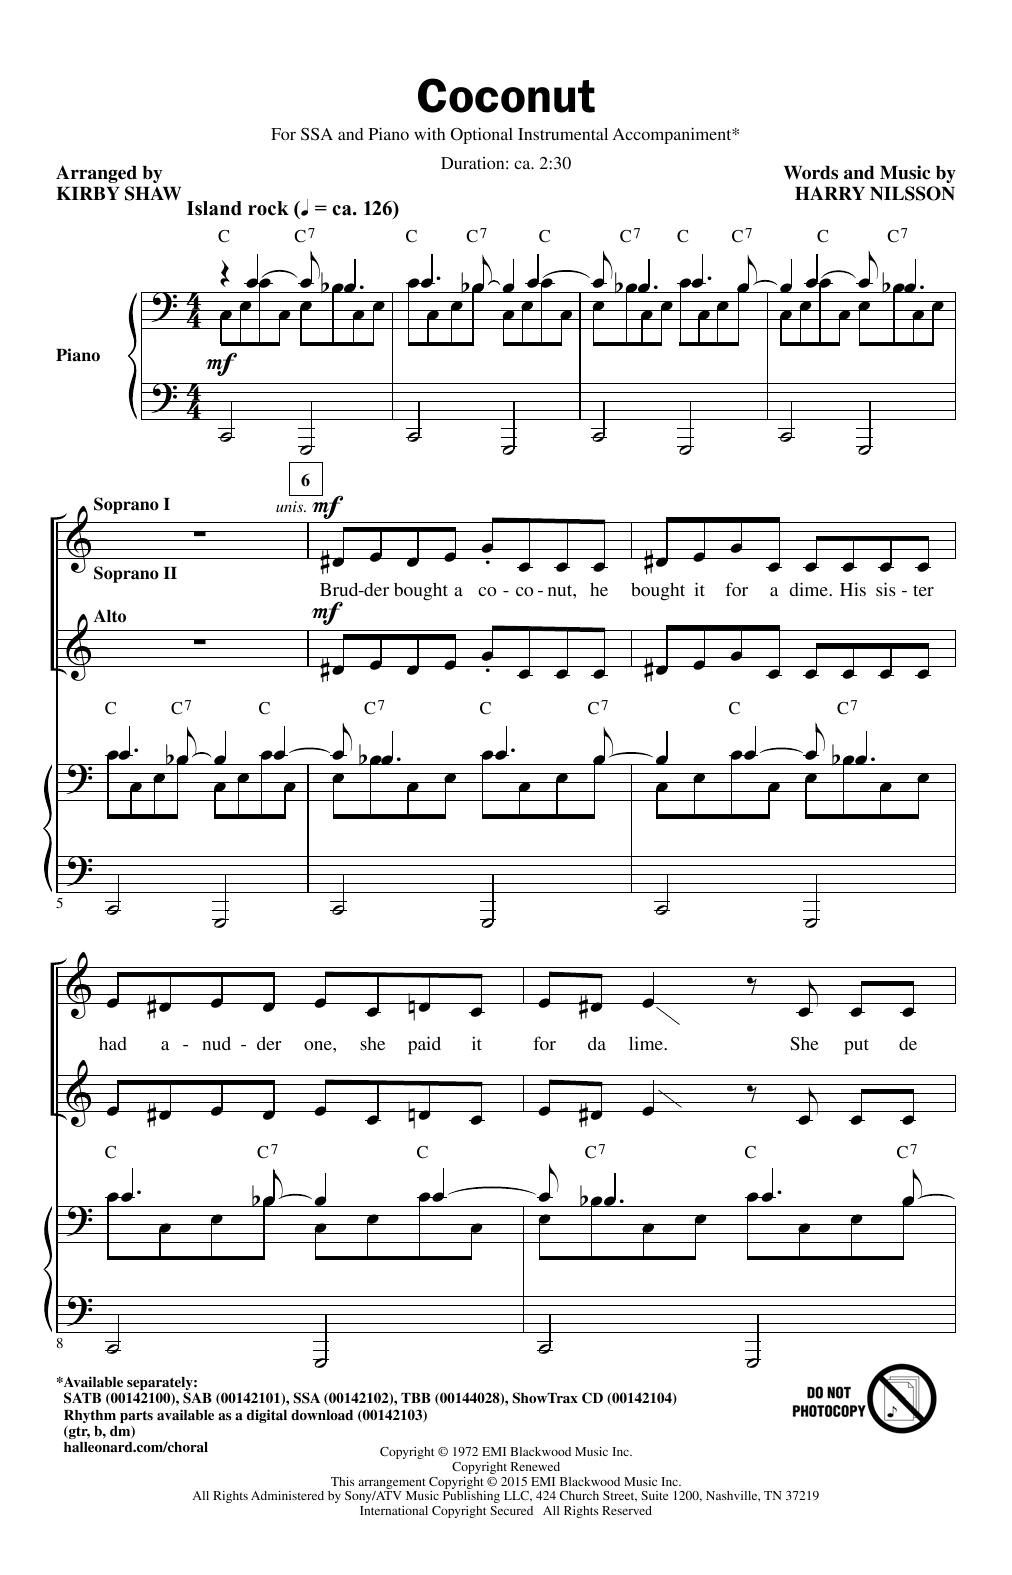 Download Harry Nilsson Coconut (arr. Kirby Shaw) Sheet Music